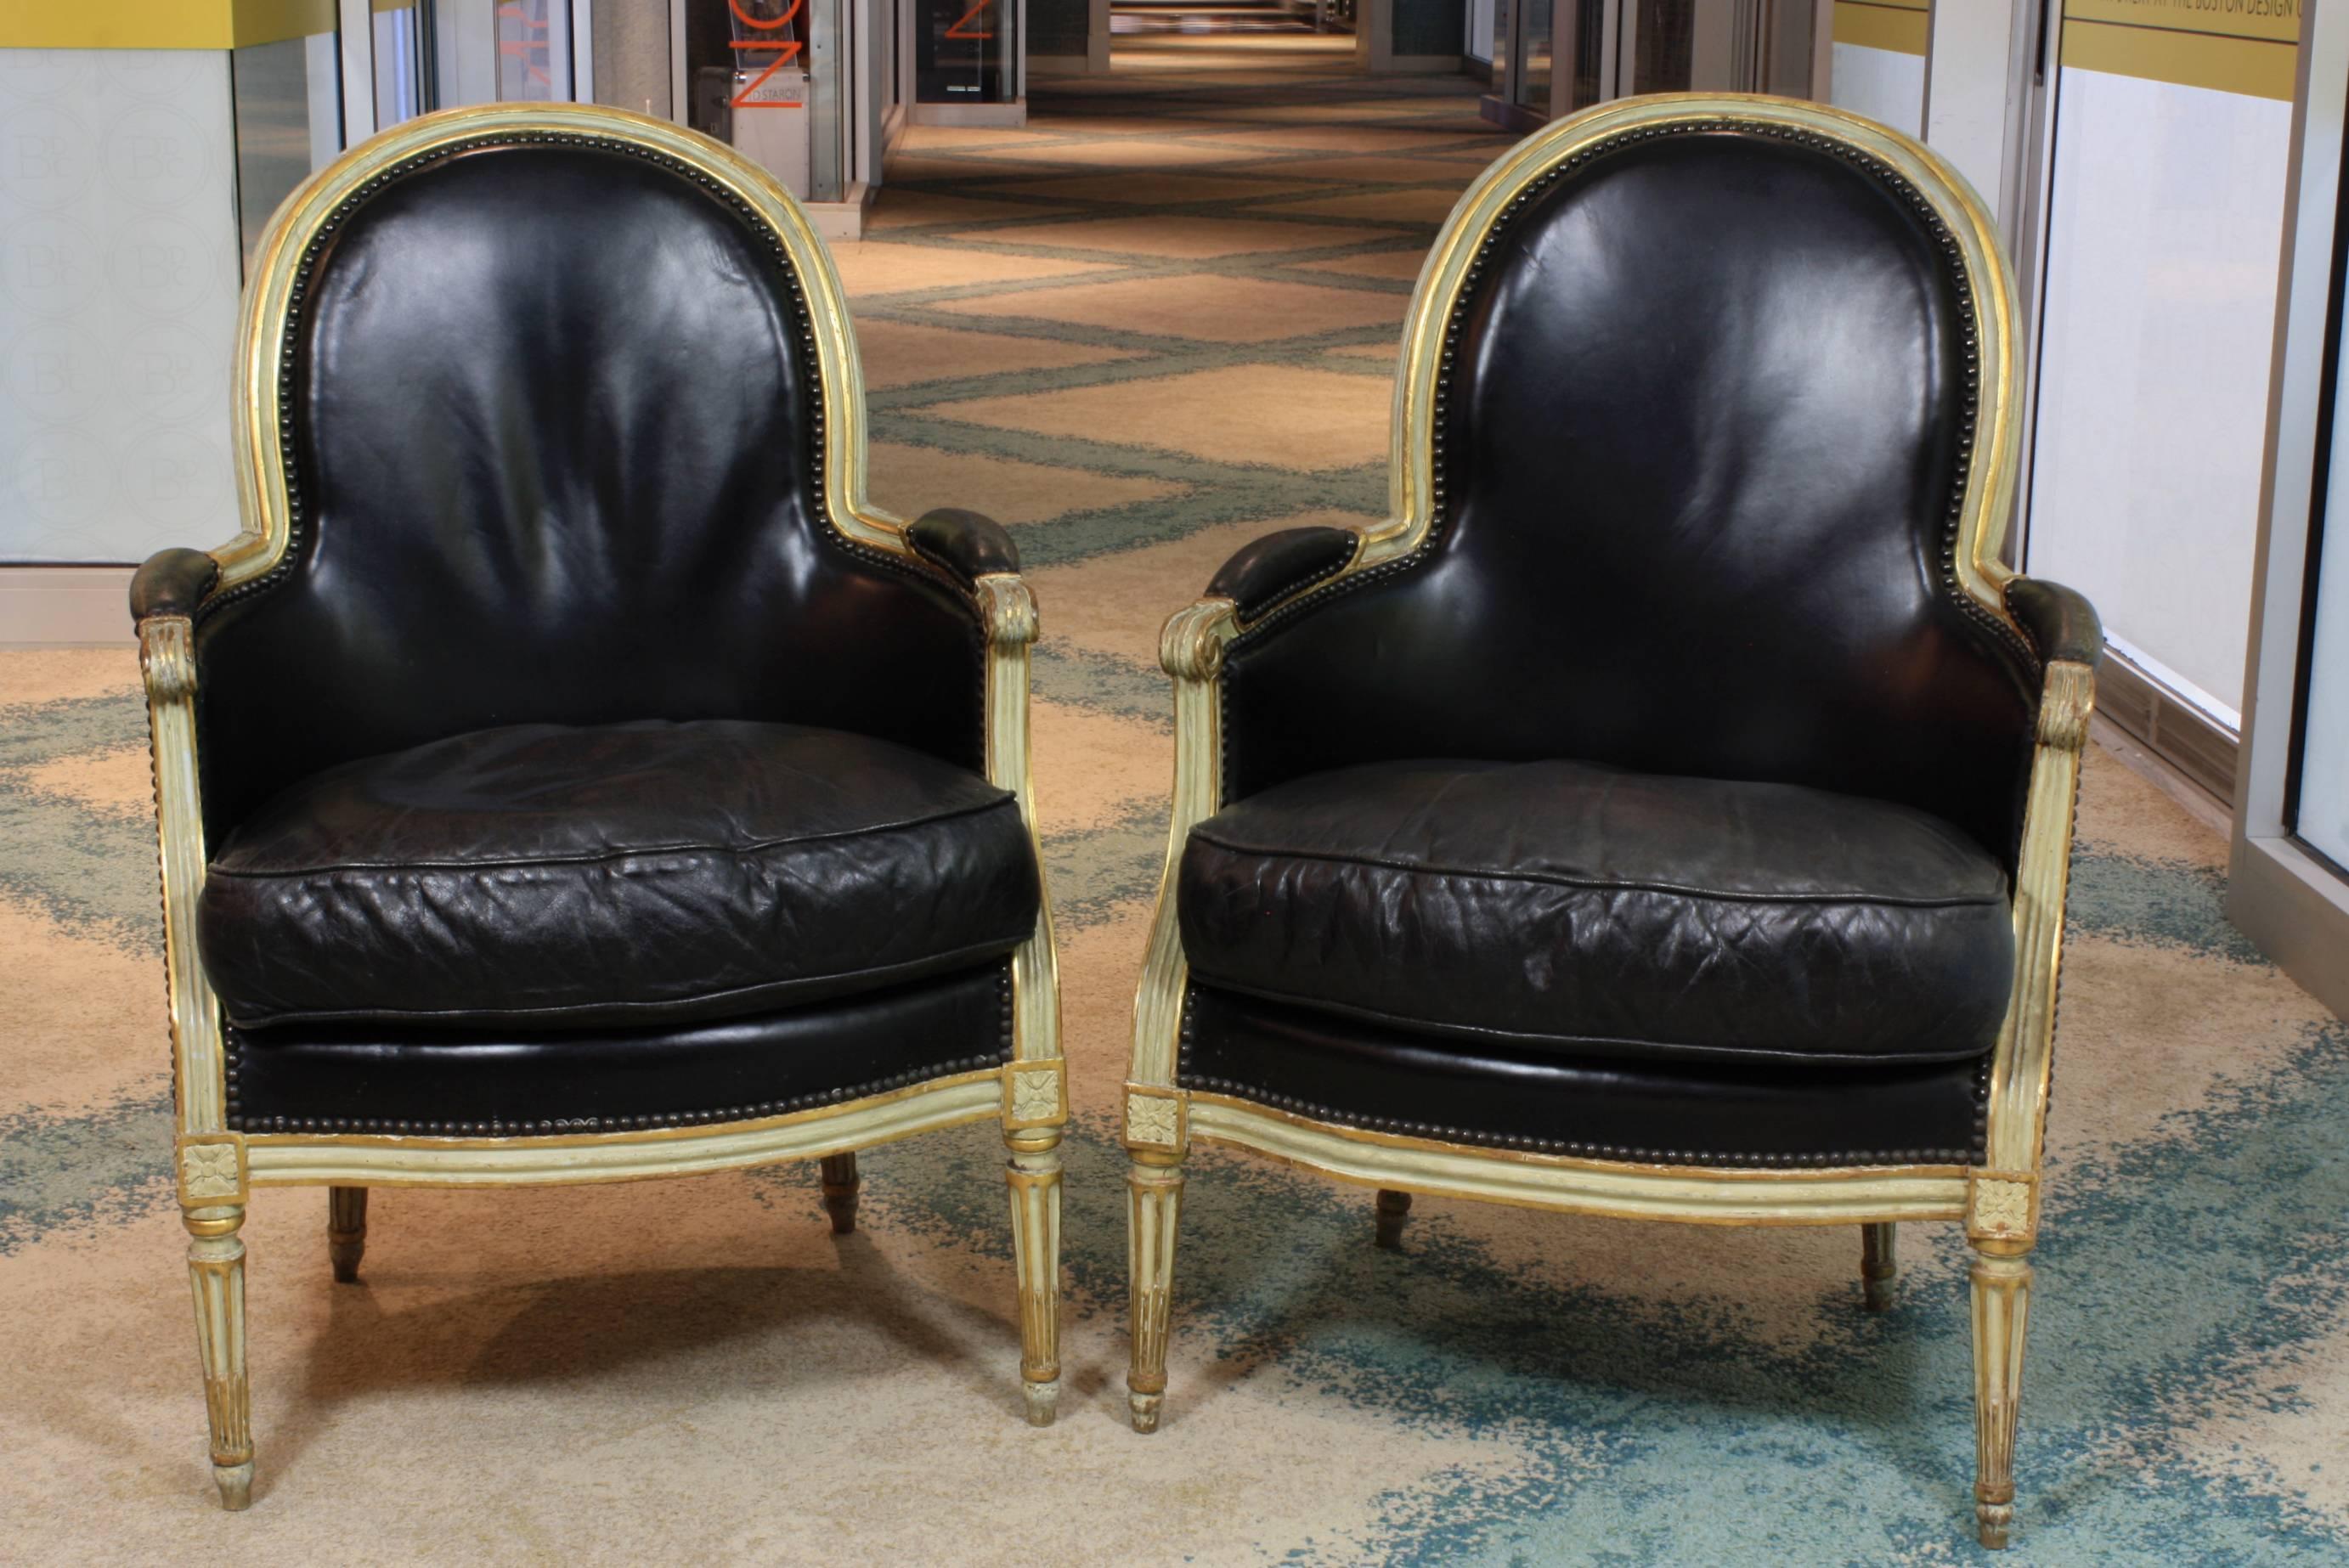 Pair of French Louis XVI period bergeres upholstered in more recent black leather finished with brass nailhead trim, circa 1785. The frames are painted in French grey-green (traces of older paint are also seen underneath more recent paint) with